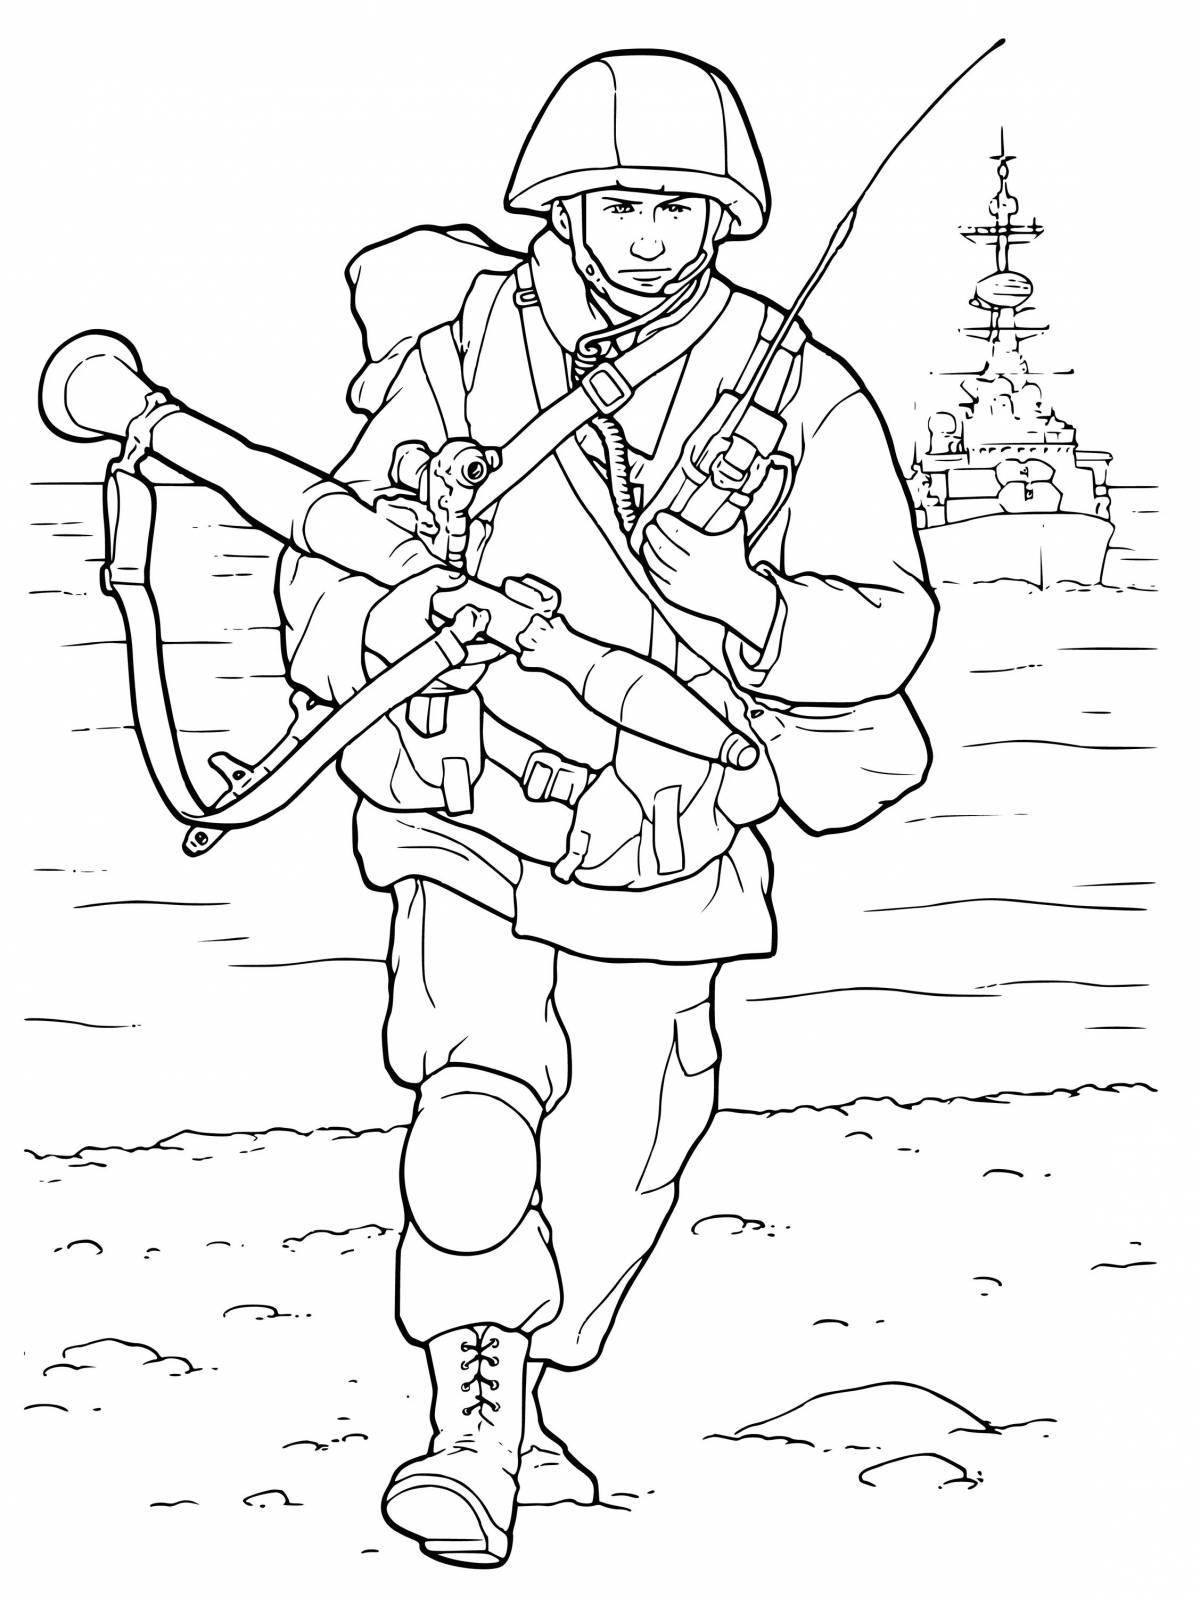 Creative russian army coloring book for preschoolers